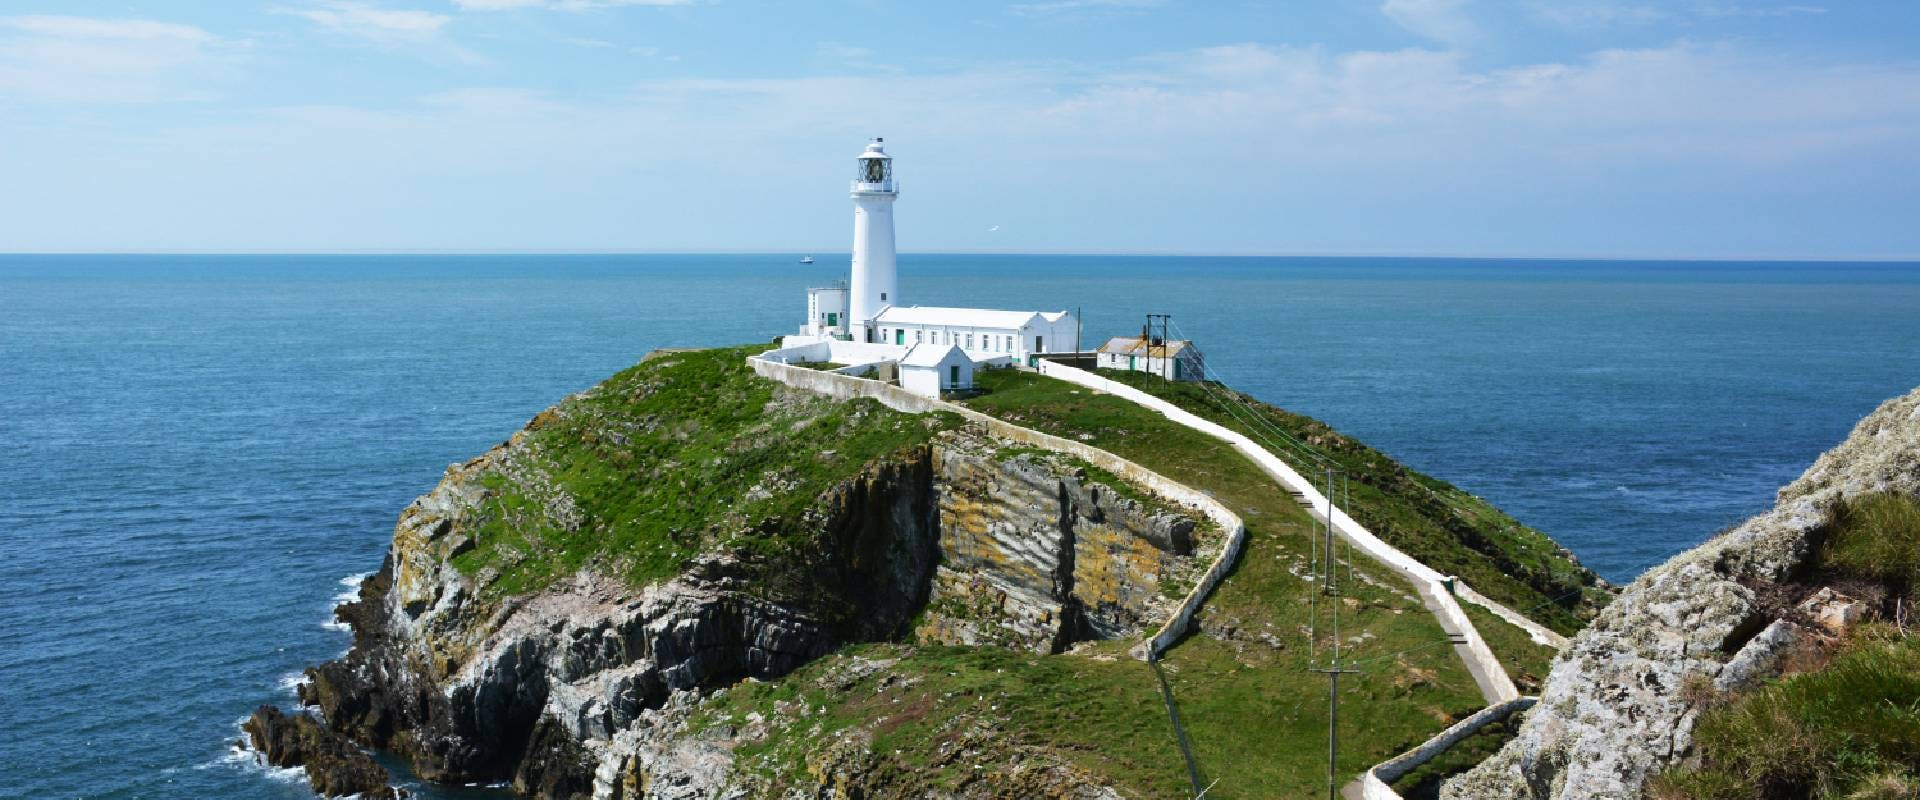 South Stack lighthouse near Holyhead, Anglesey